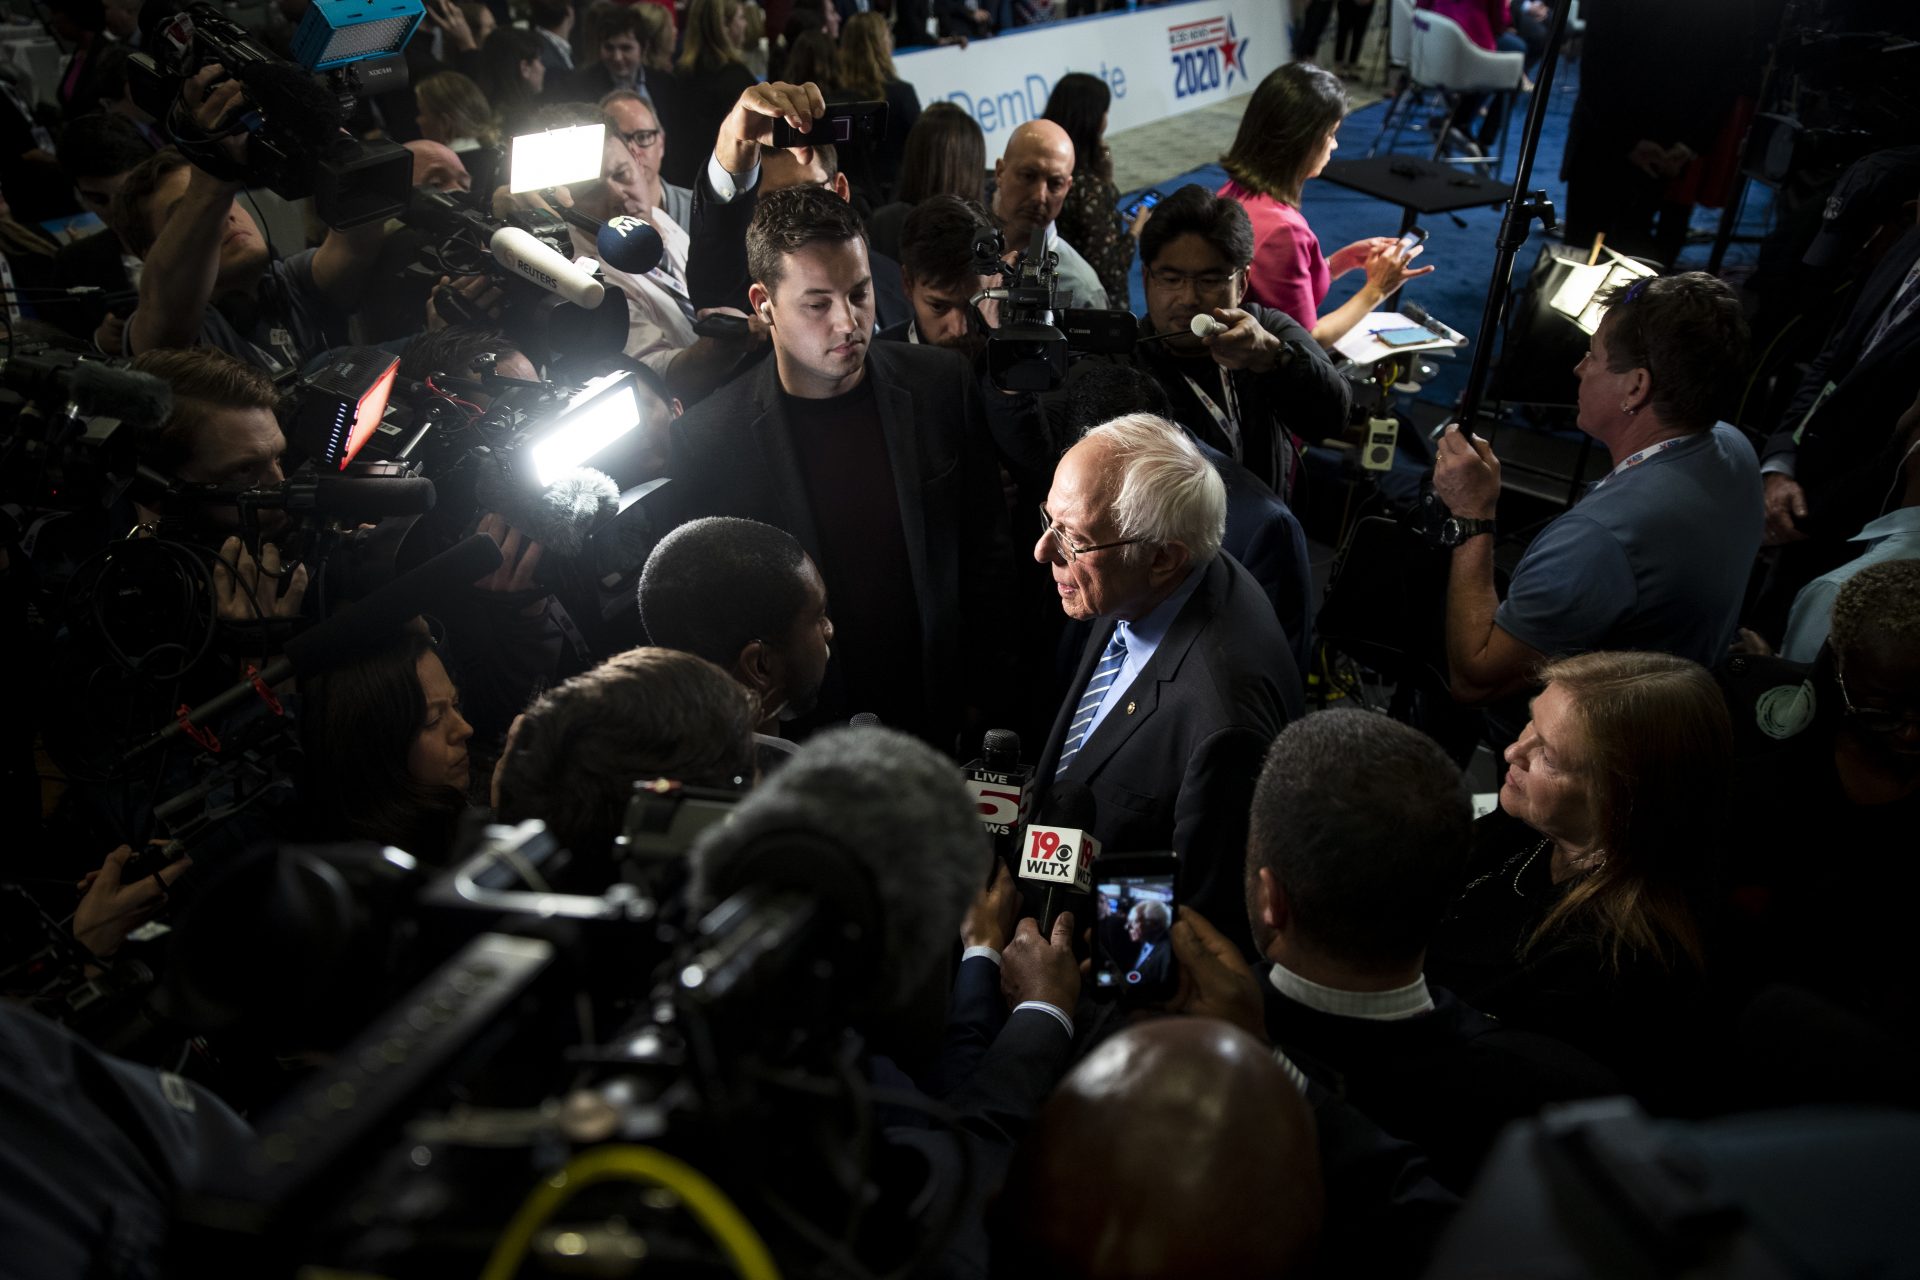 FILE - In this Tuesday, Feb. 25, 2020, file photo, Democratic presidential candidate Sen. Bernie Sanders, I-Vt., speaks with members of the media after a Democratic presidential primary debate in Charleston, S.C. As Sanders reaches out to black voters ahead of South Carolina's Saturday primary, seeking to cut into former Vice President Joe Biden's firewall of black support in the state, the Democratic front-runner's Jewish identity isn't much of a factor.